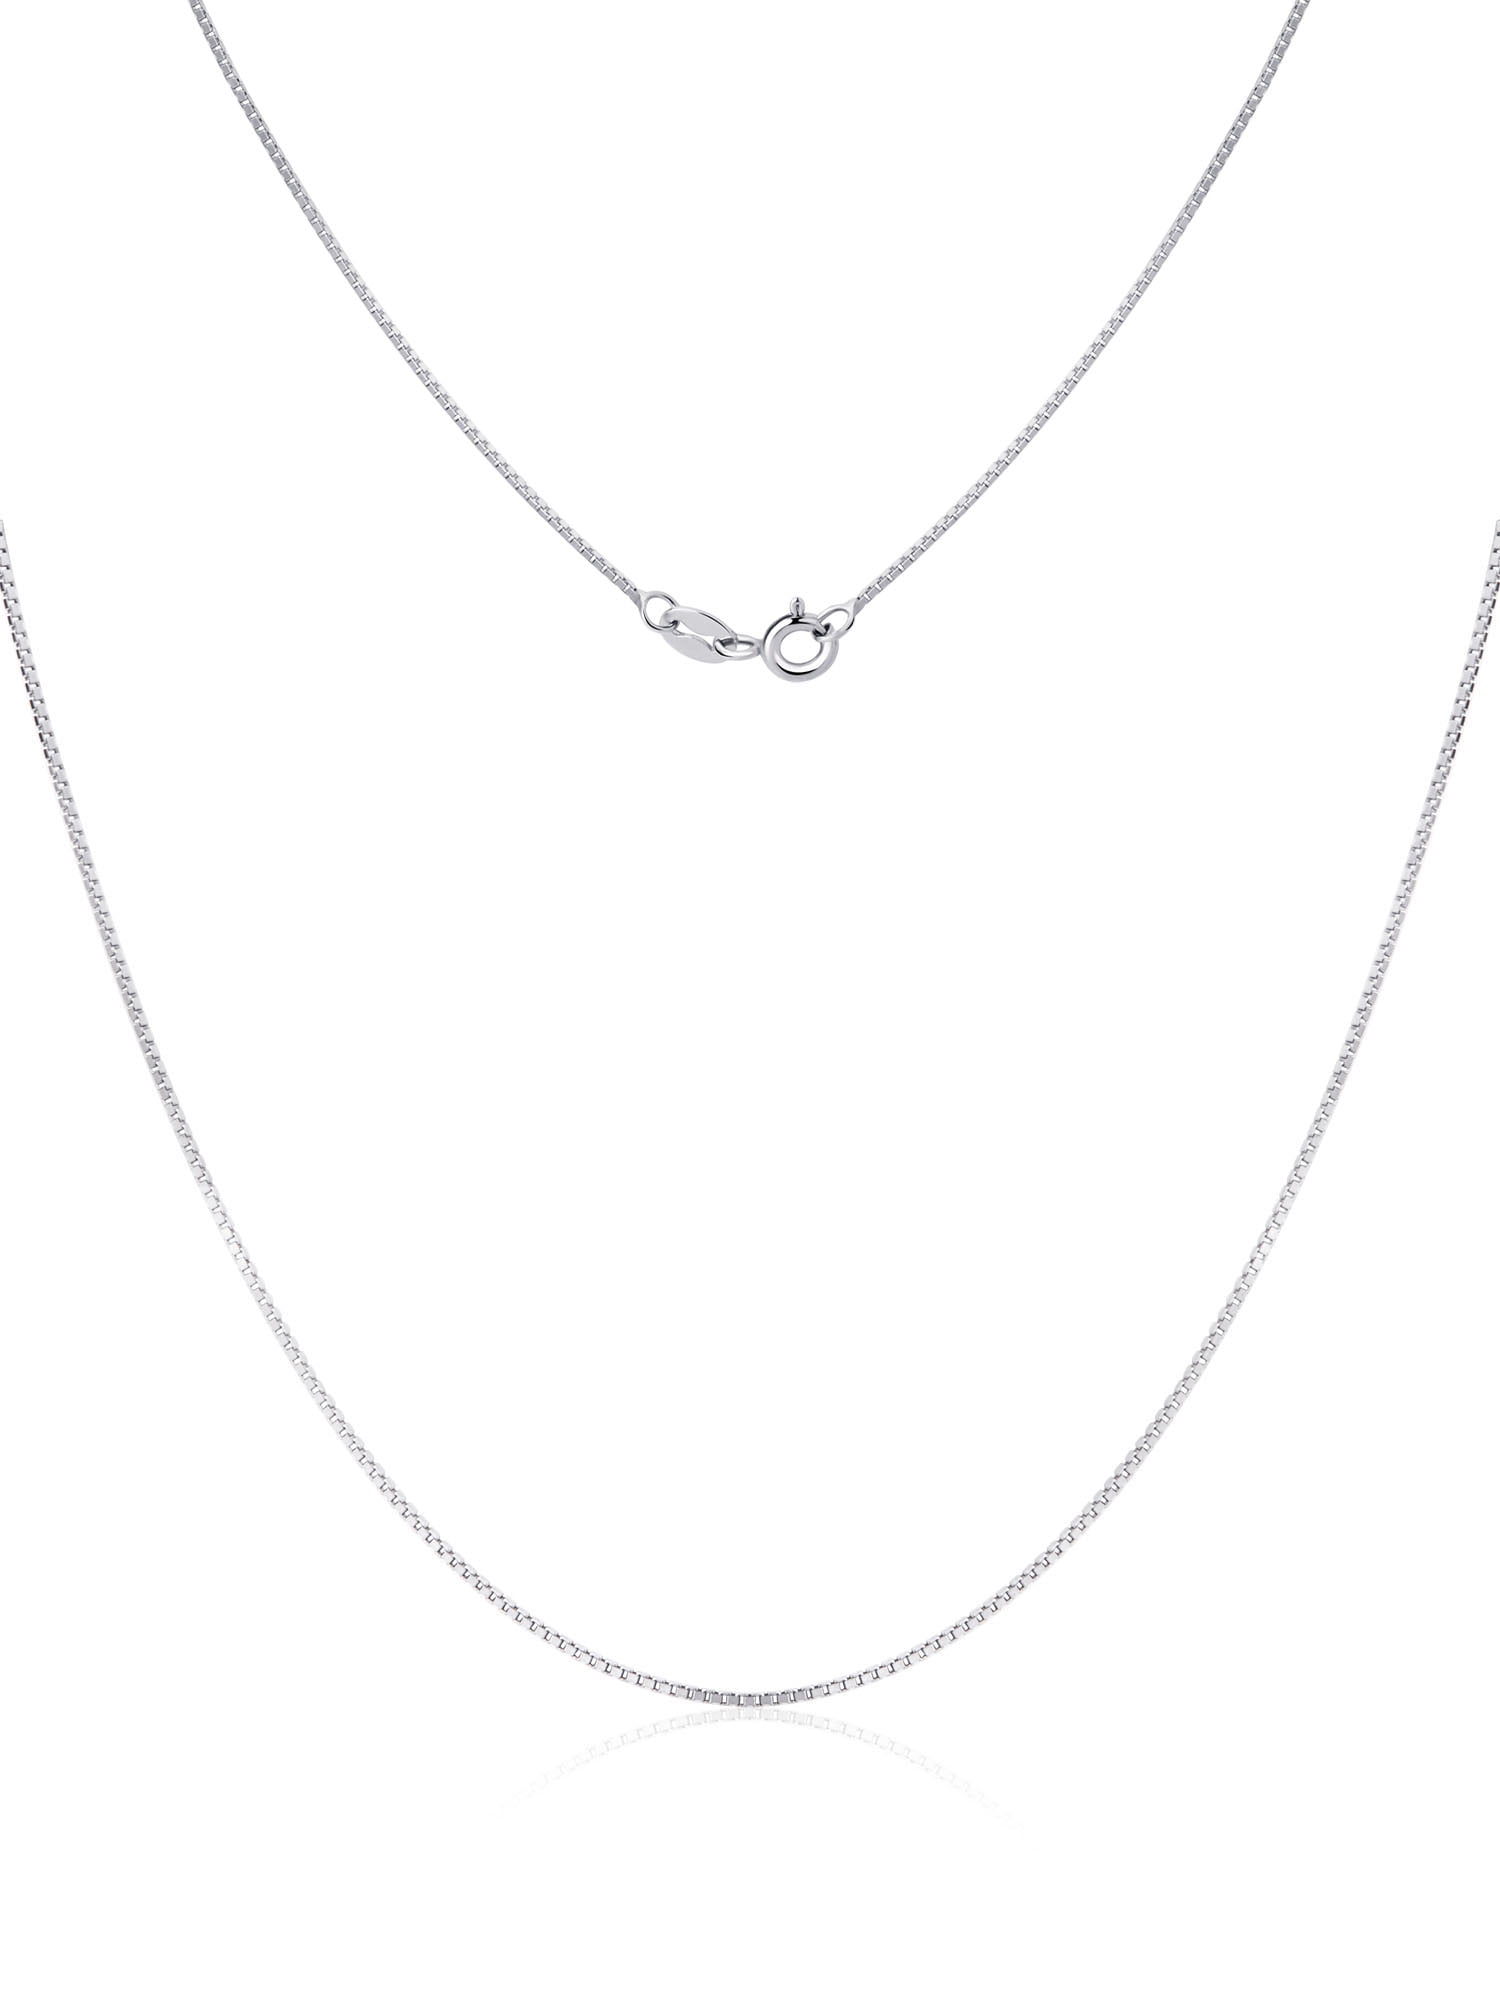 Details about   925 STERLING SILVER BOX CHAIN 